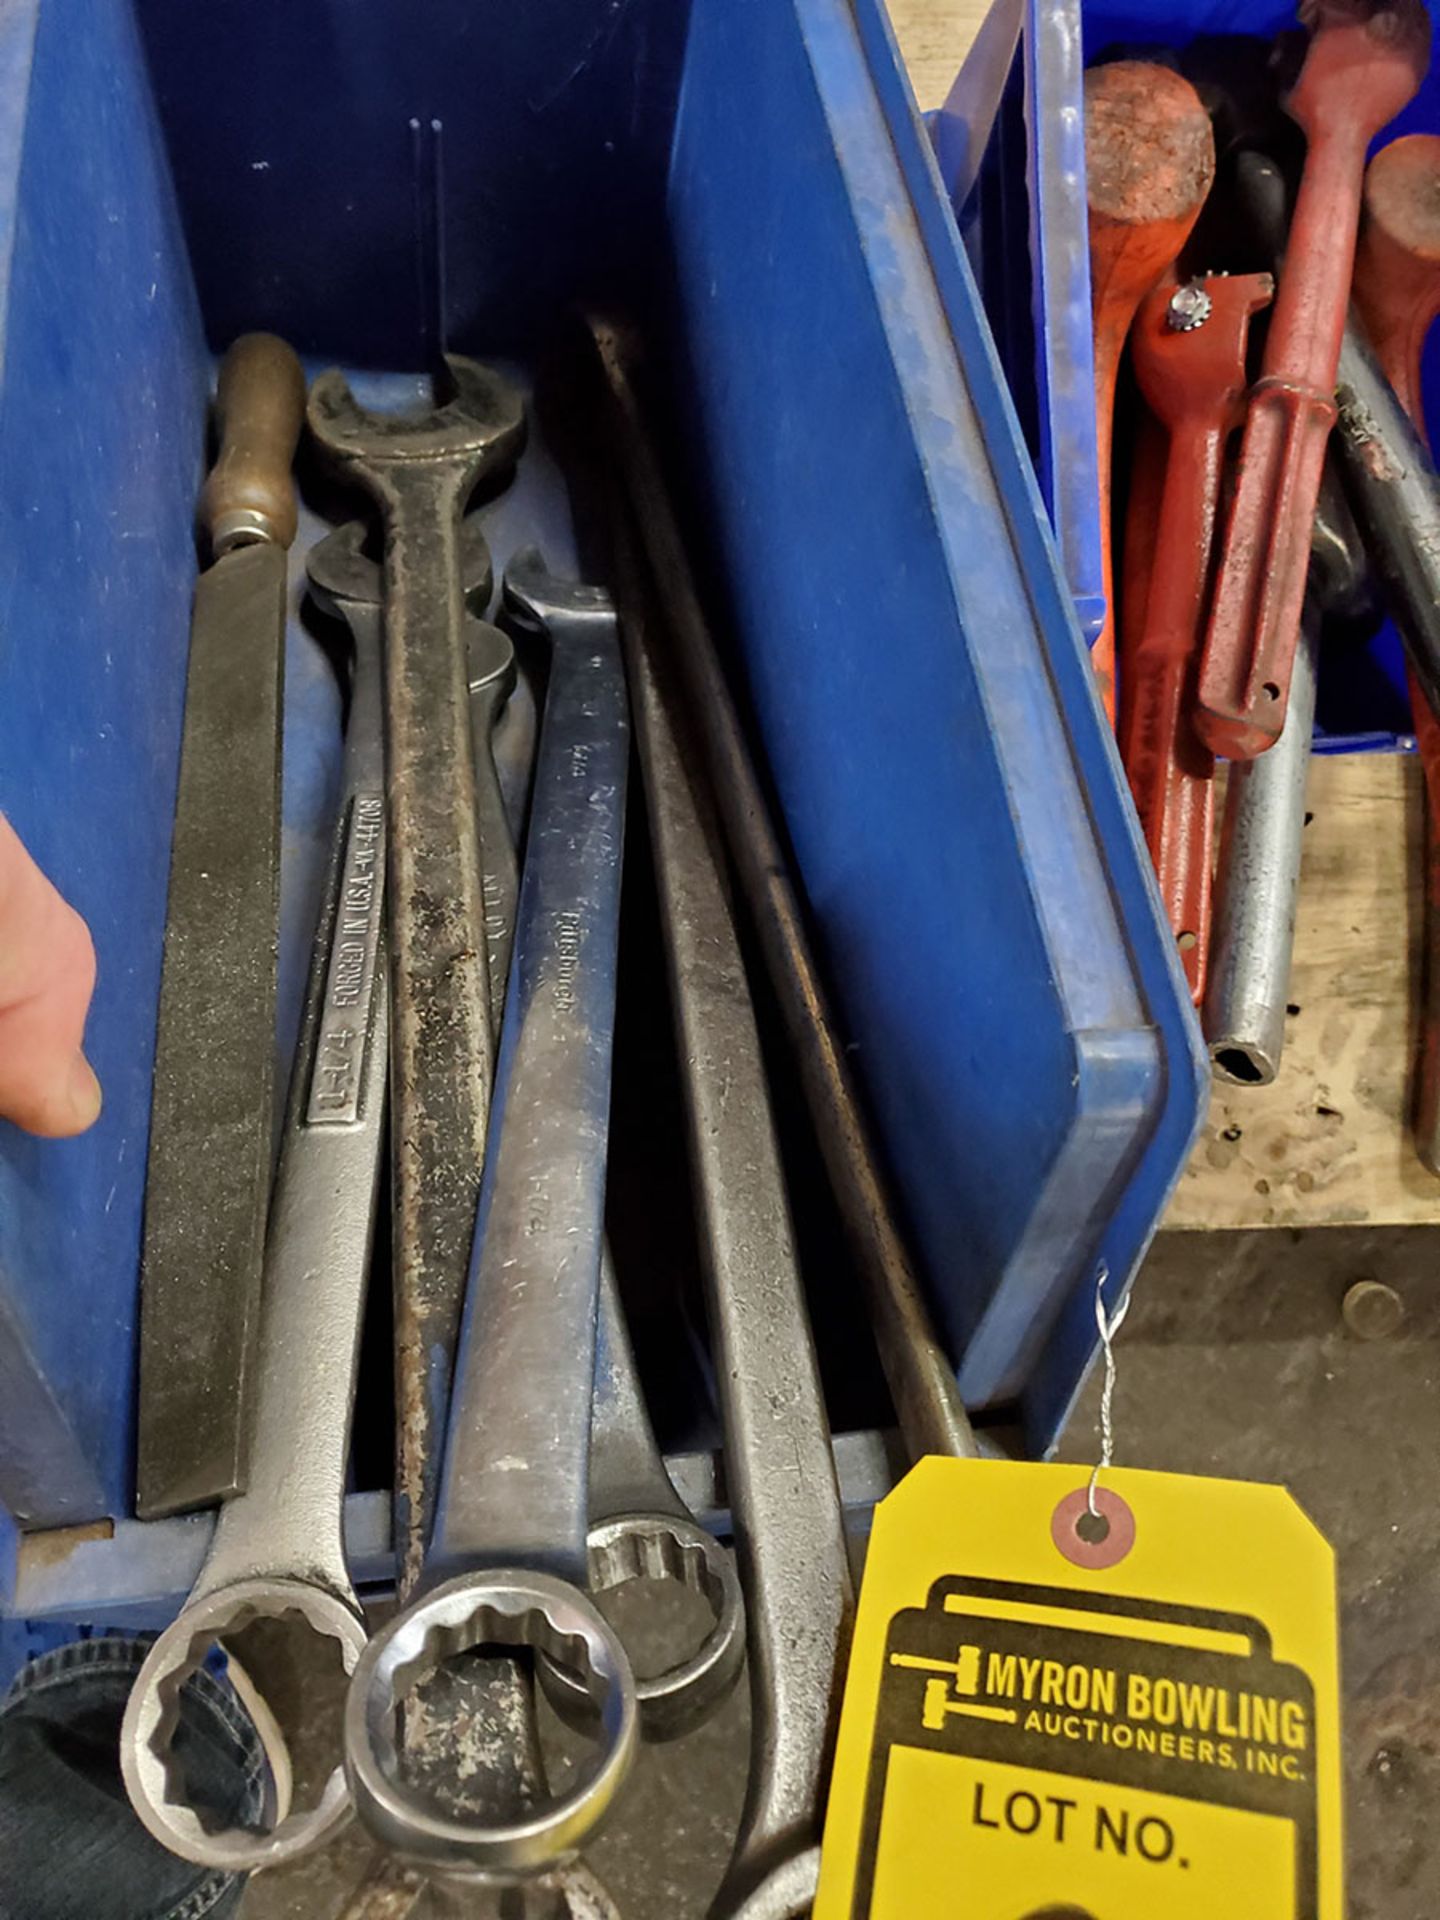 (3) BOXES OF 24’’ CREATOLOGY CRESCENT WRENCH, ALLEN WRENCHES, RUBBER MALLETS, OPEN/CLOSED END - Image 4 of 10